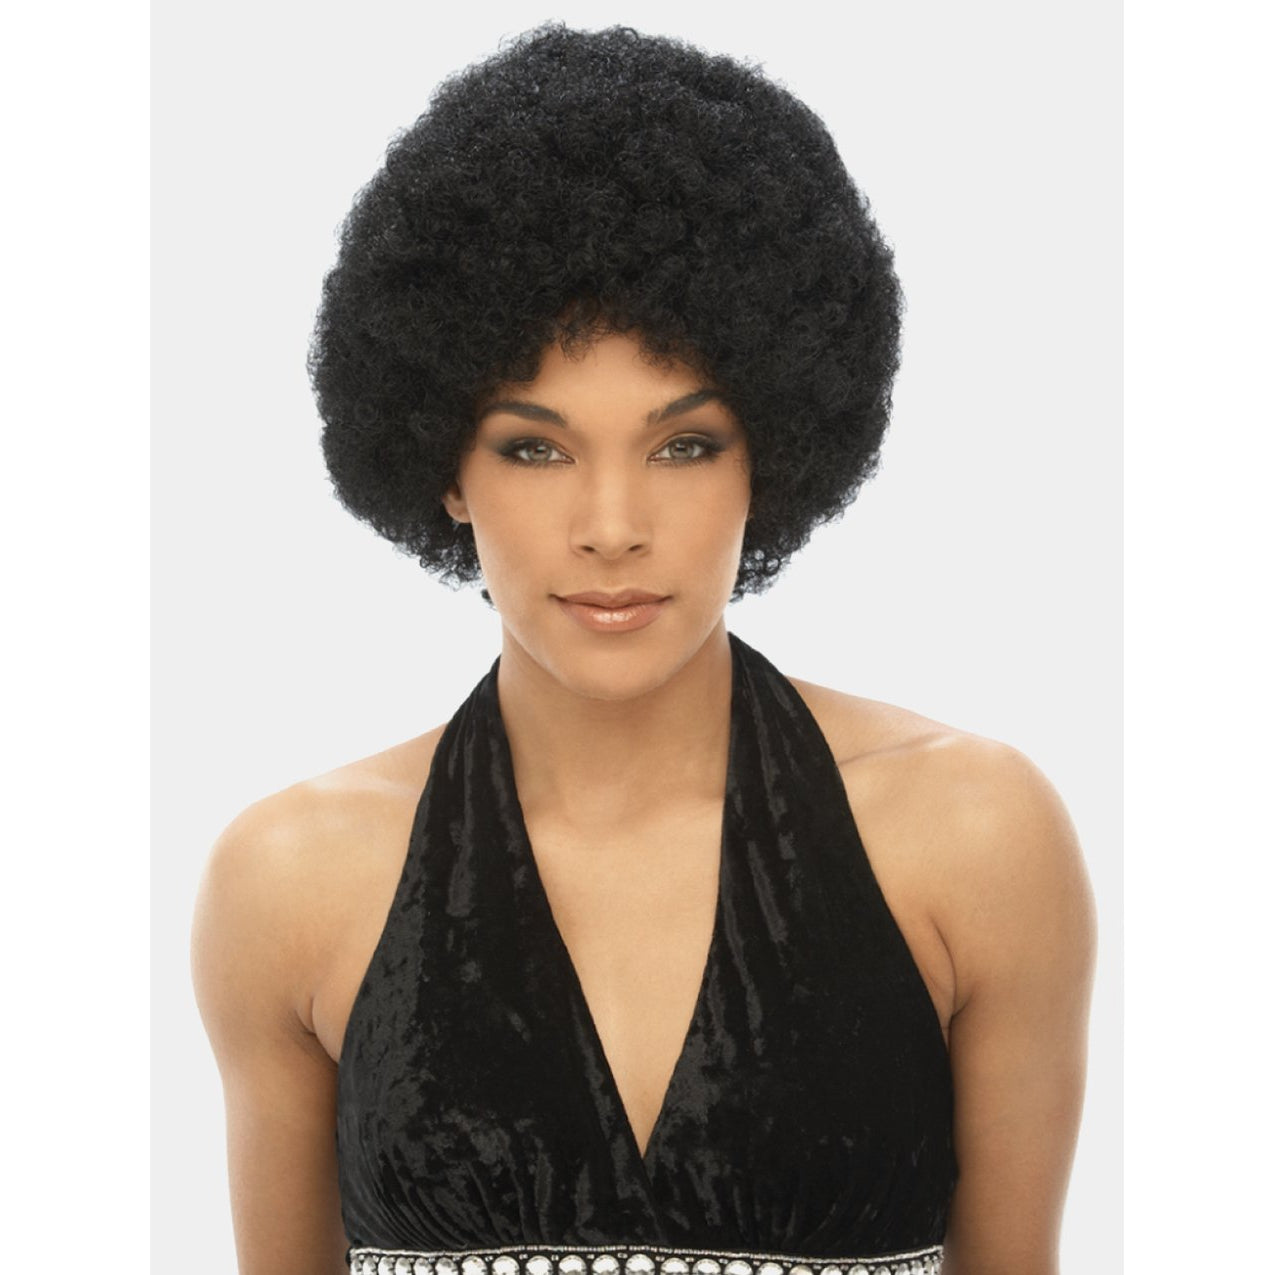 Harlem 125 Afro Wig - VIP Extensions